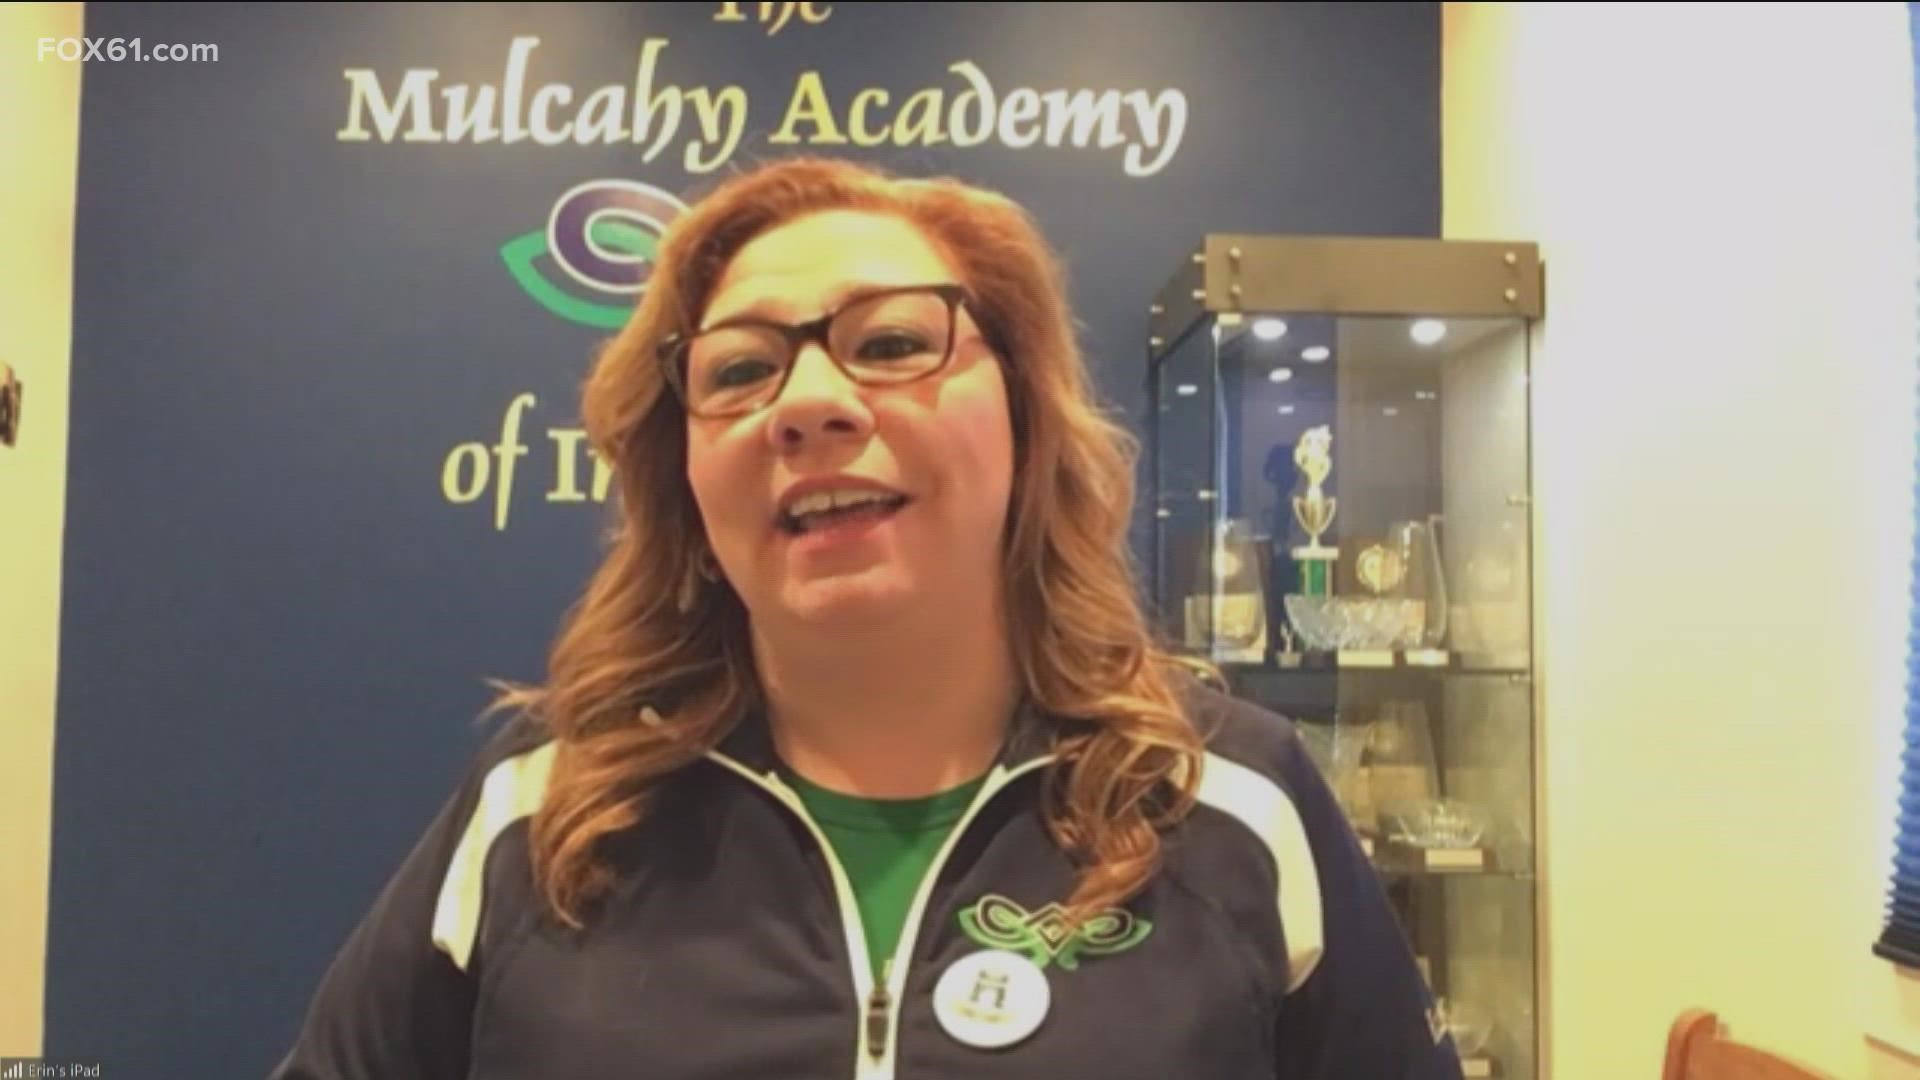 Erin Mulcahy, the owner and director of the Mulcahy Academy for Irish Dance in Glastonbury, previews what folks may expect at the Hartford St. Patrick's Day Parade.